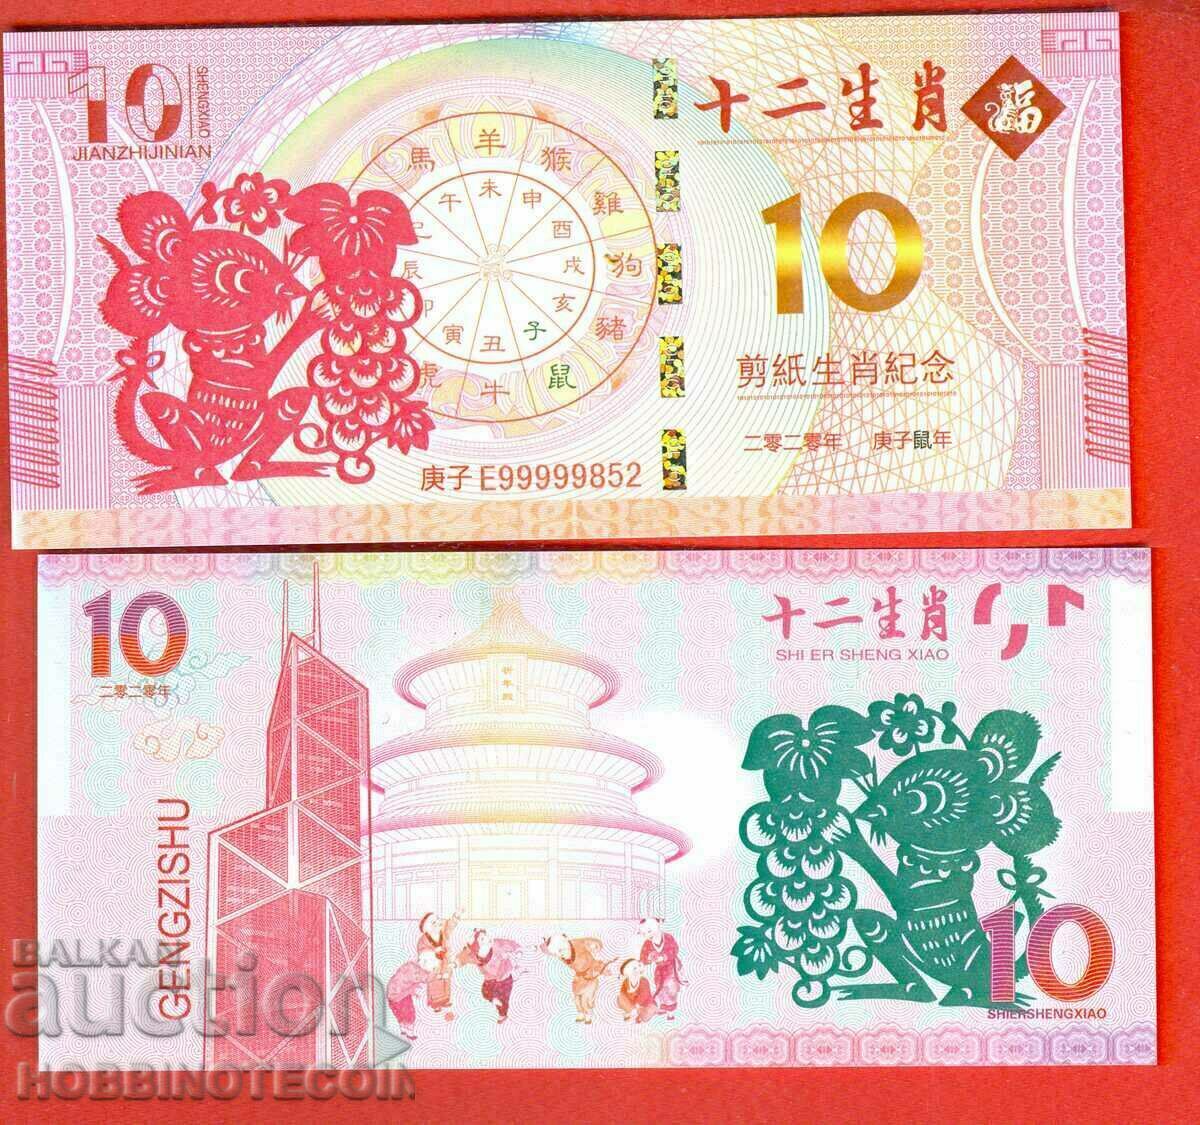 MACAO MACAO 10 Pataka SOUVENIR Year MOUSE NEW UNC